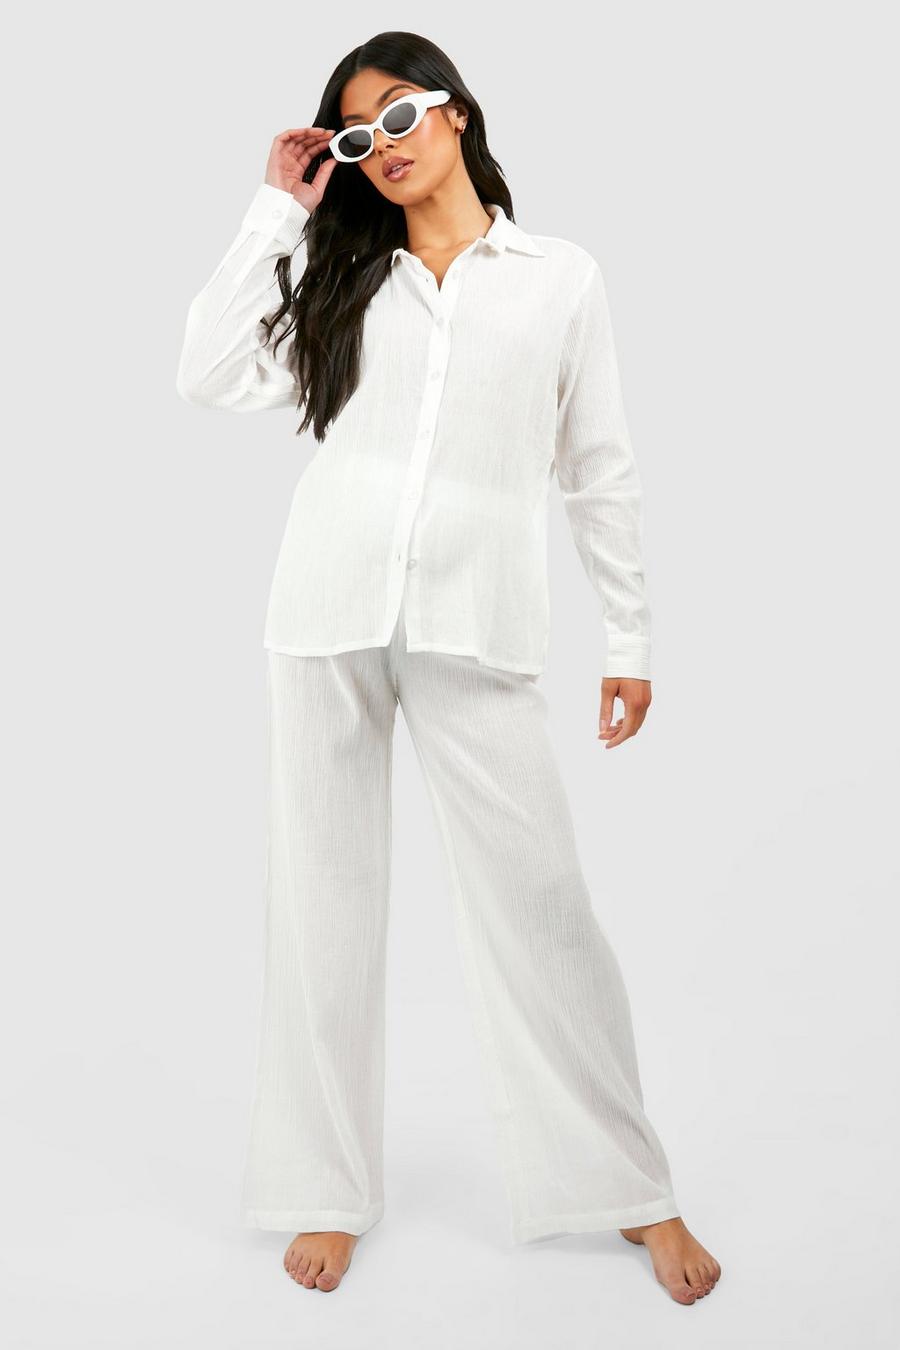 White Maternity Cheesecloth Beach Shirt And Trouser Cover Up